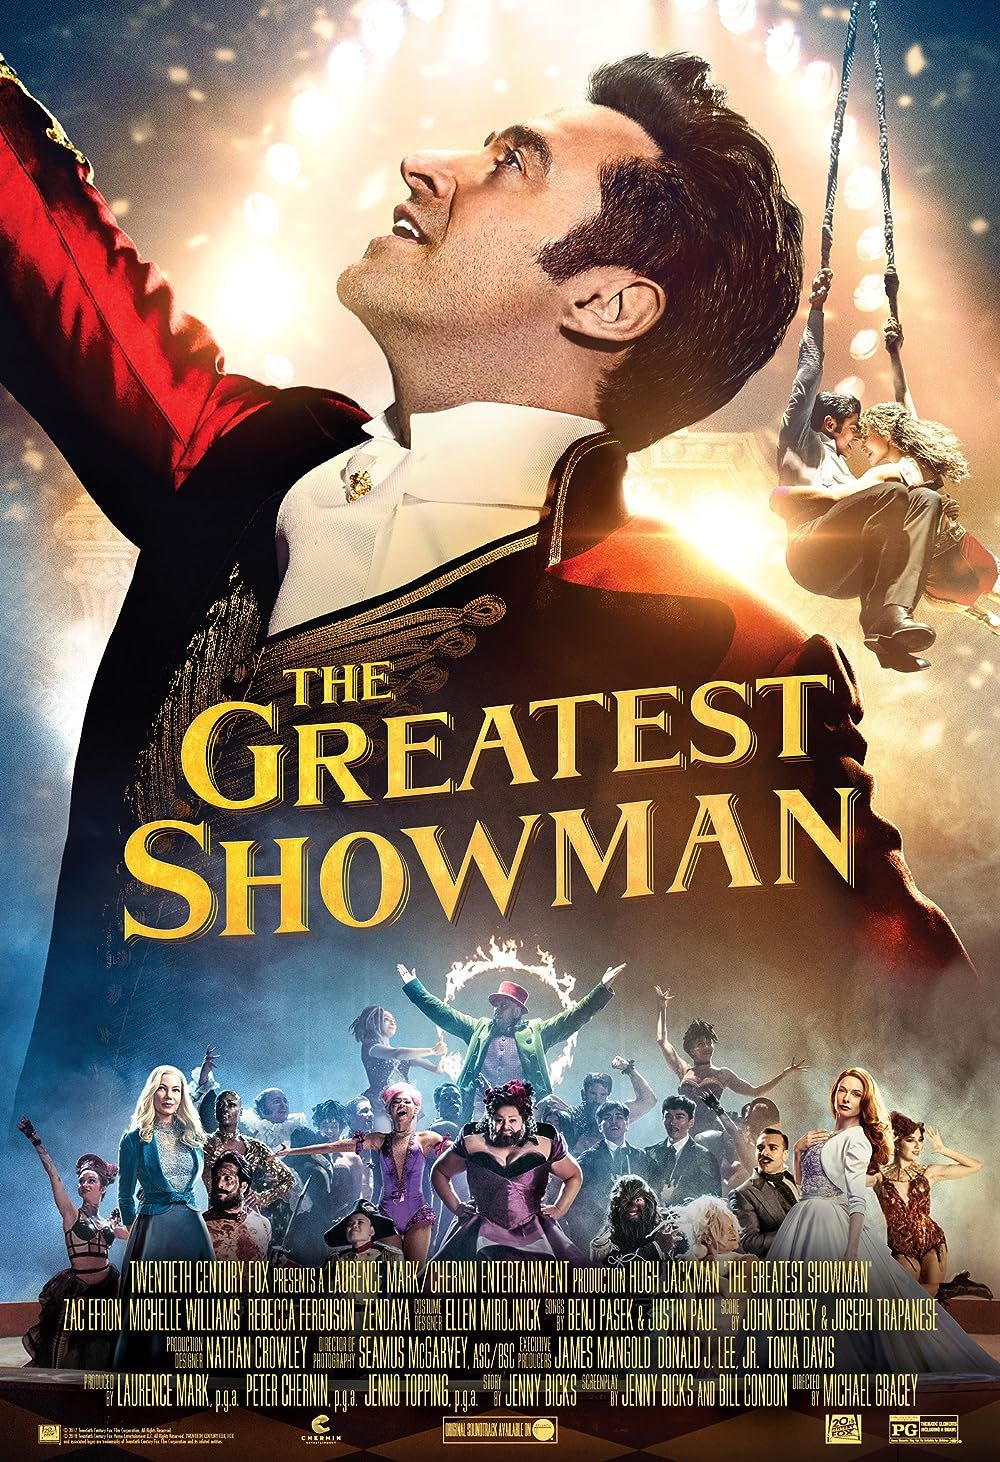 Hugh Jackman on top and the rest of the cast of The Greatest Showman at the bottom on the poster of the film